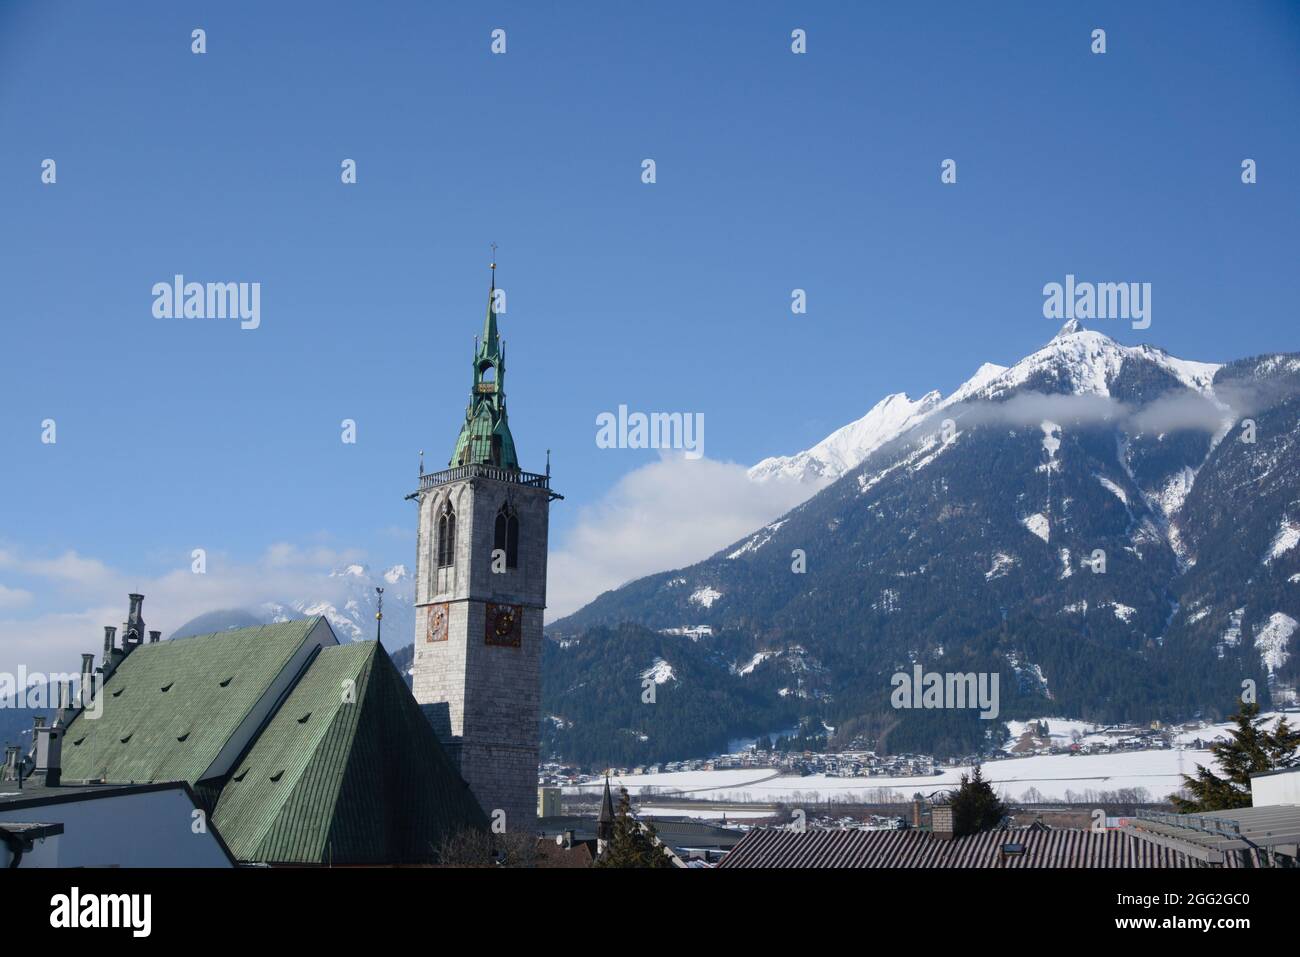 Church of schwaz in front of tyrolian mountains on a clear blue winter day Stock Photo